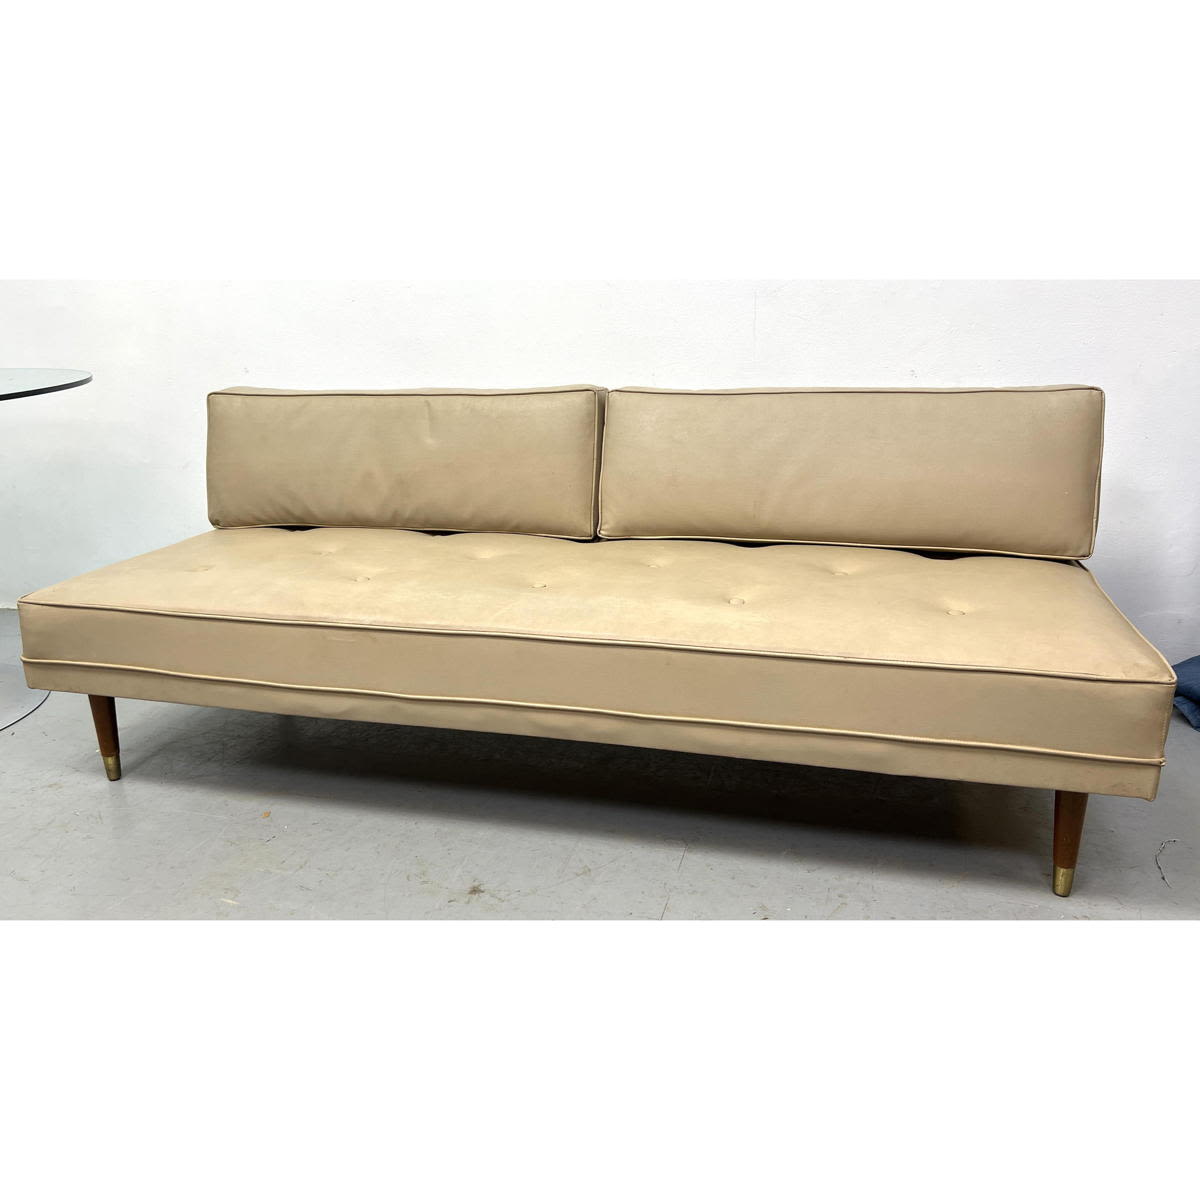 Modern Day Bed Sofa. Wood Plank